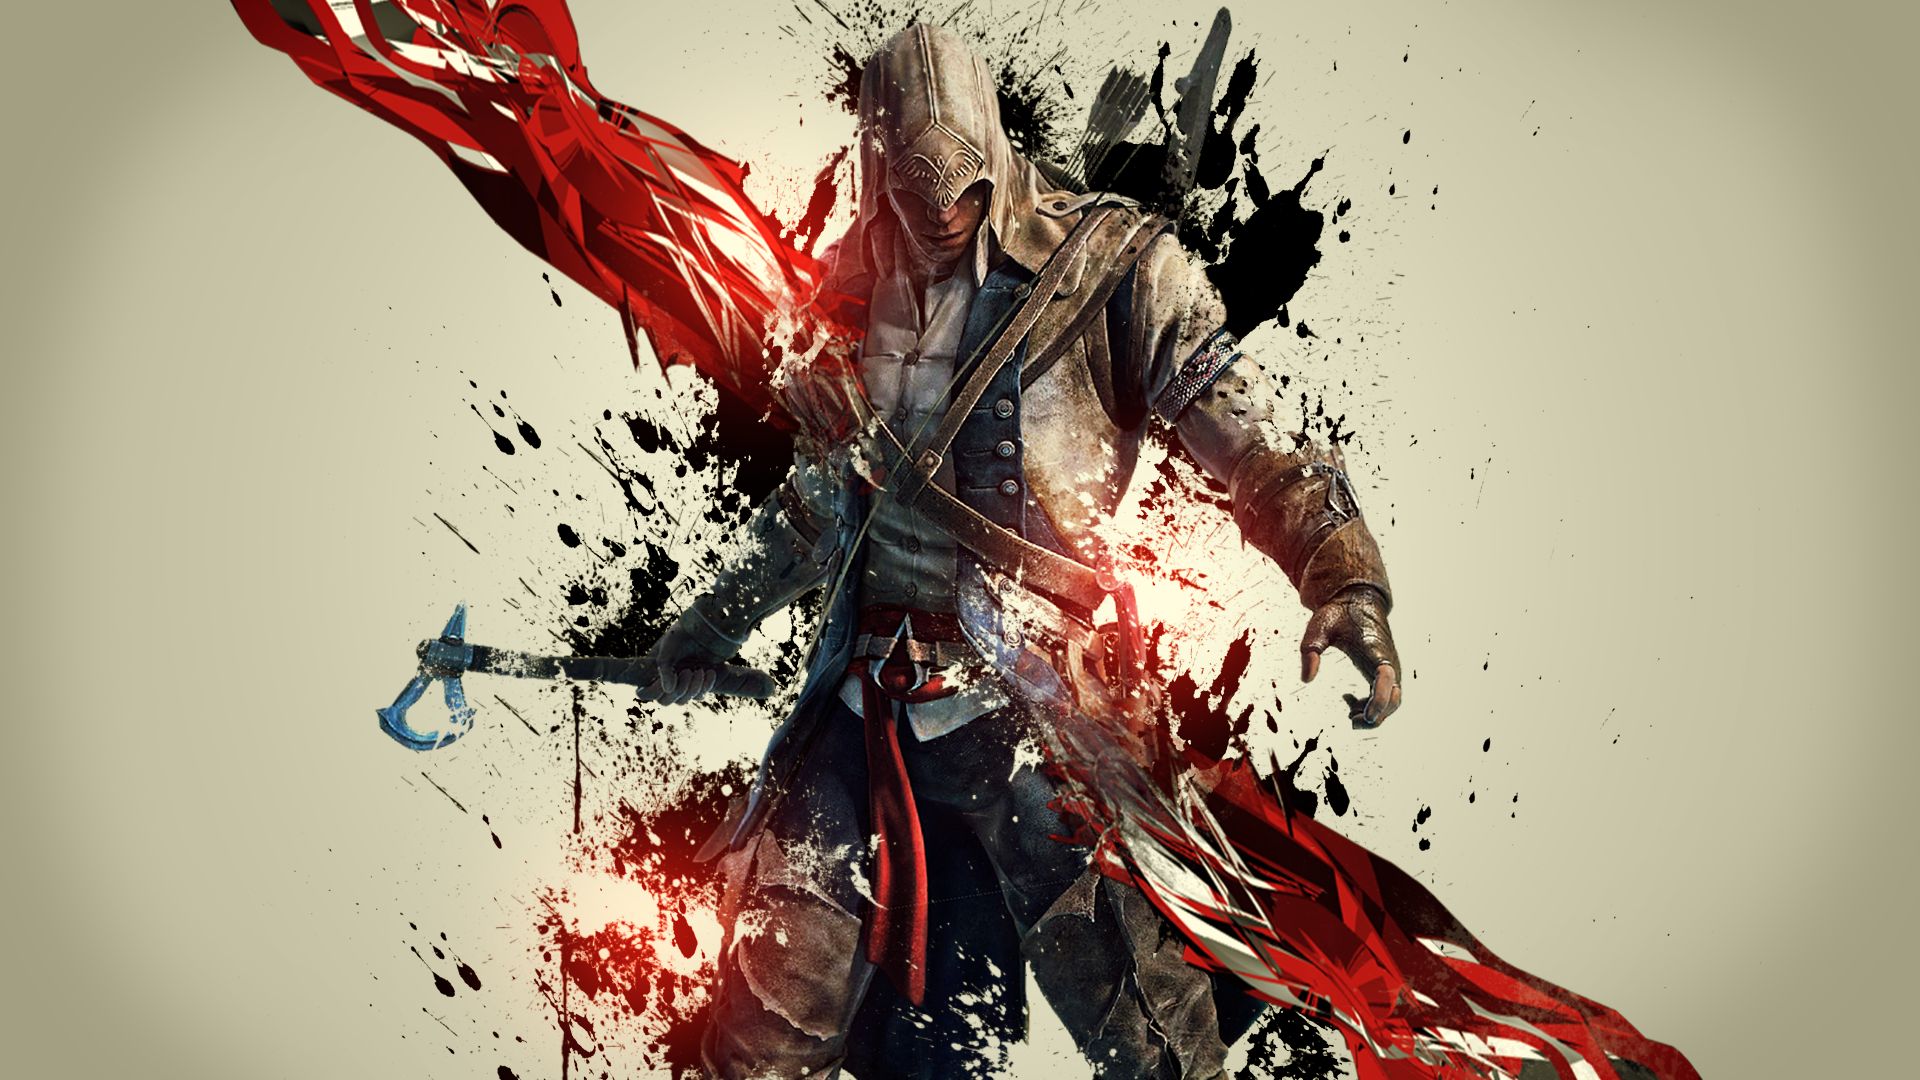 HD photos assassin's creed, video game, connor (assassin's creed), assassin's creed iii